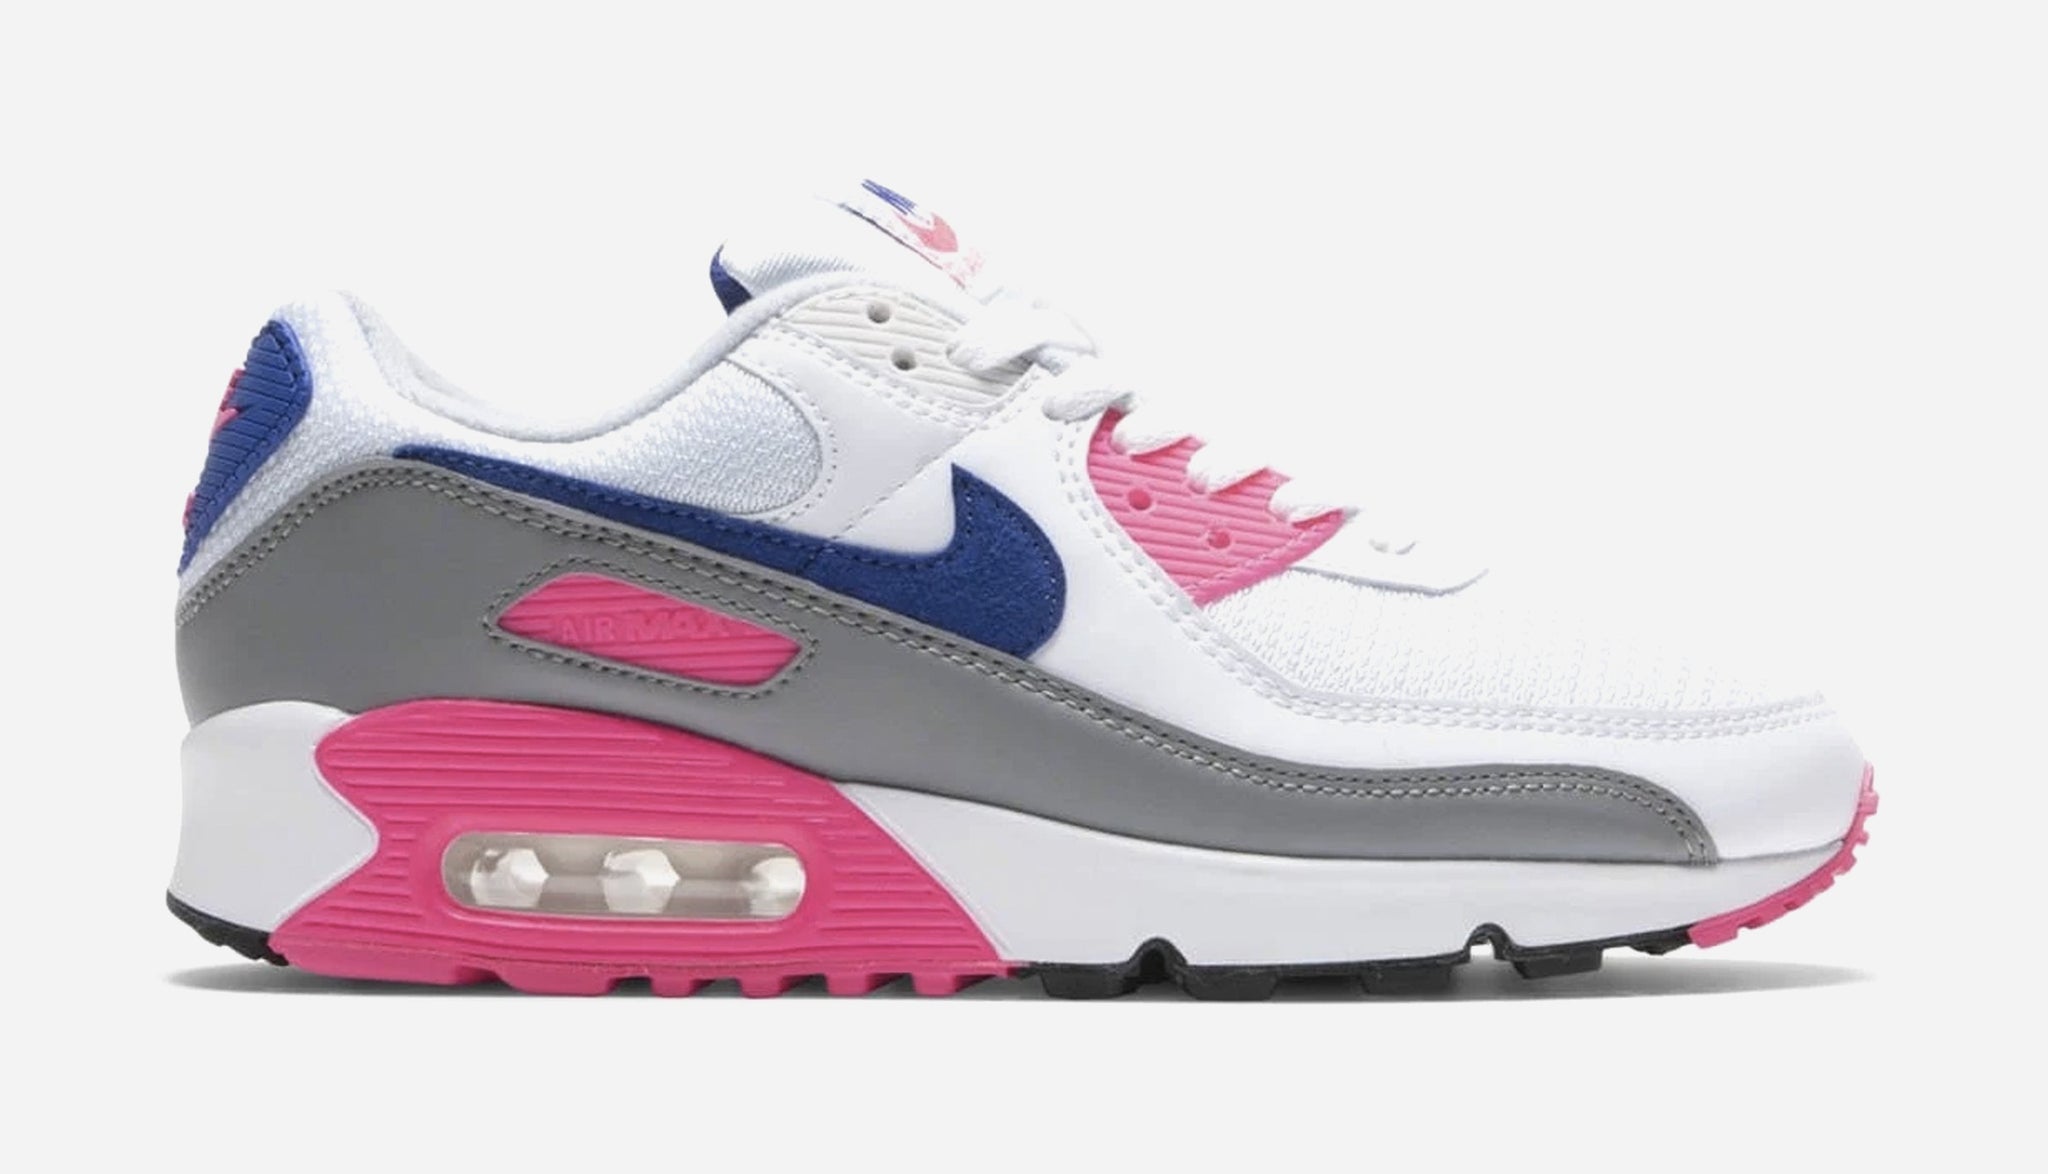 Nike Air Max 90 Laser Pink Womens Lifestyle Shoes Pink Blue CT1887-100 – Shoe